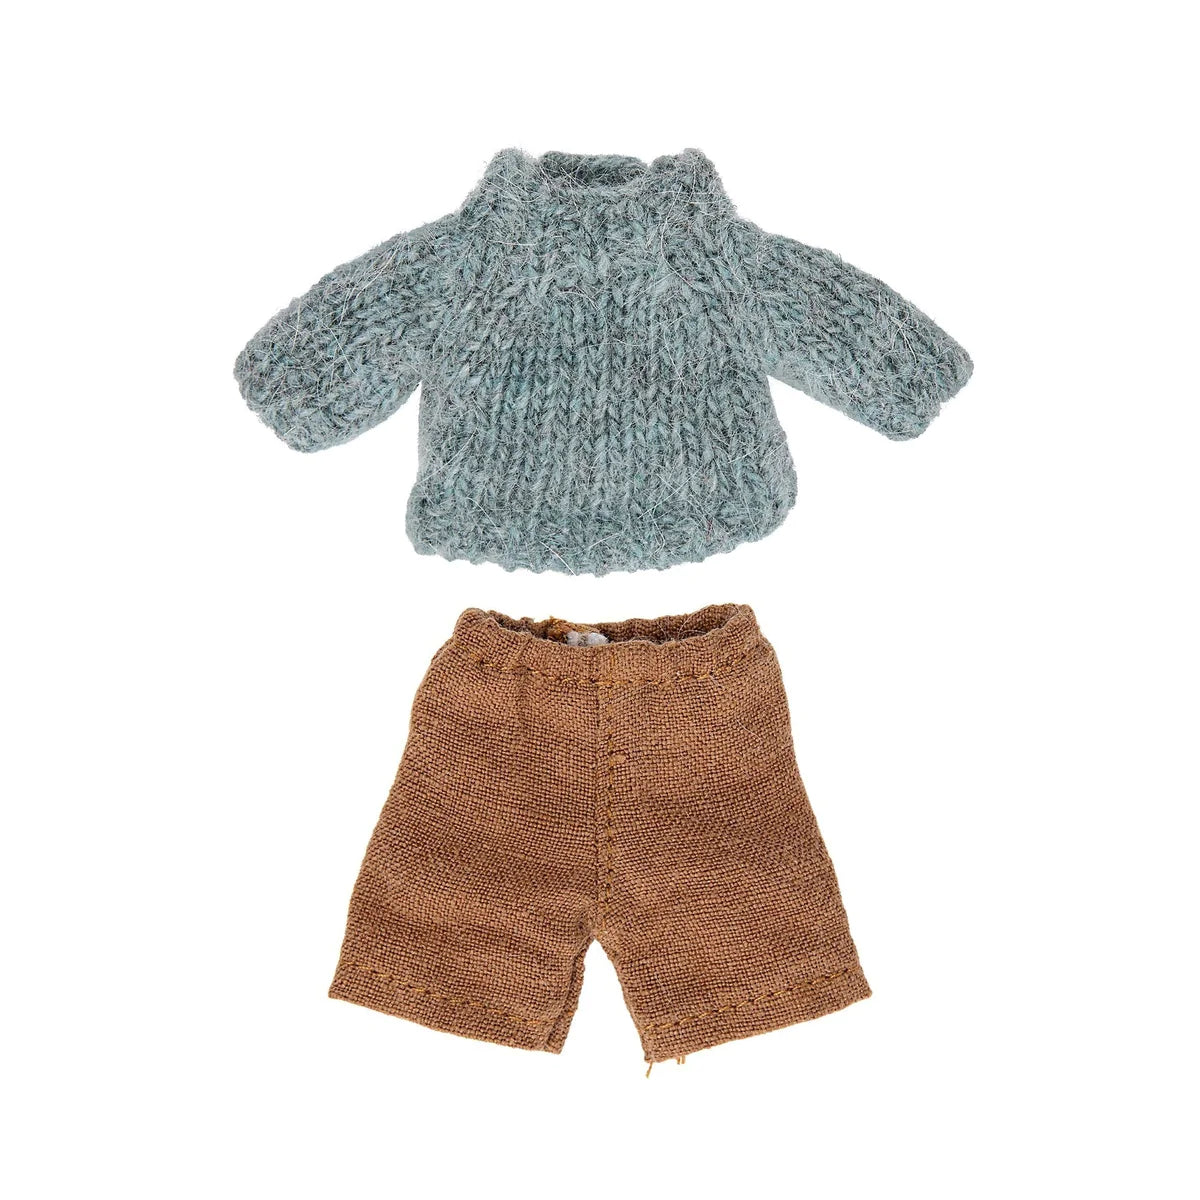 Knitted sweater and pants for big brother mouse